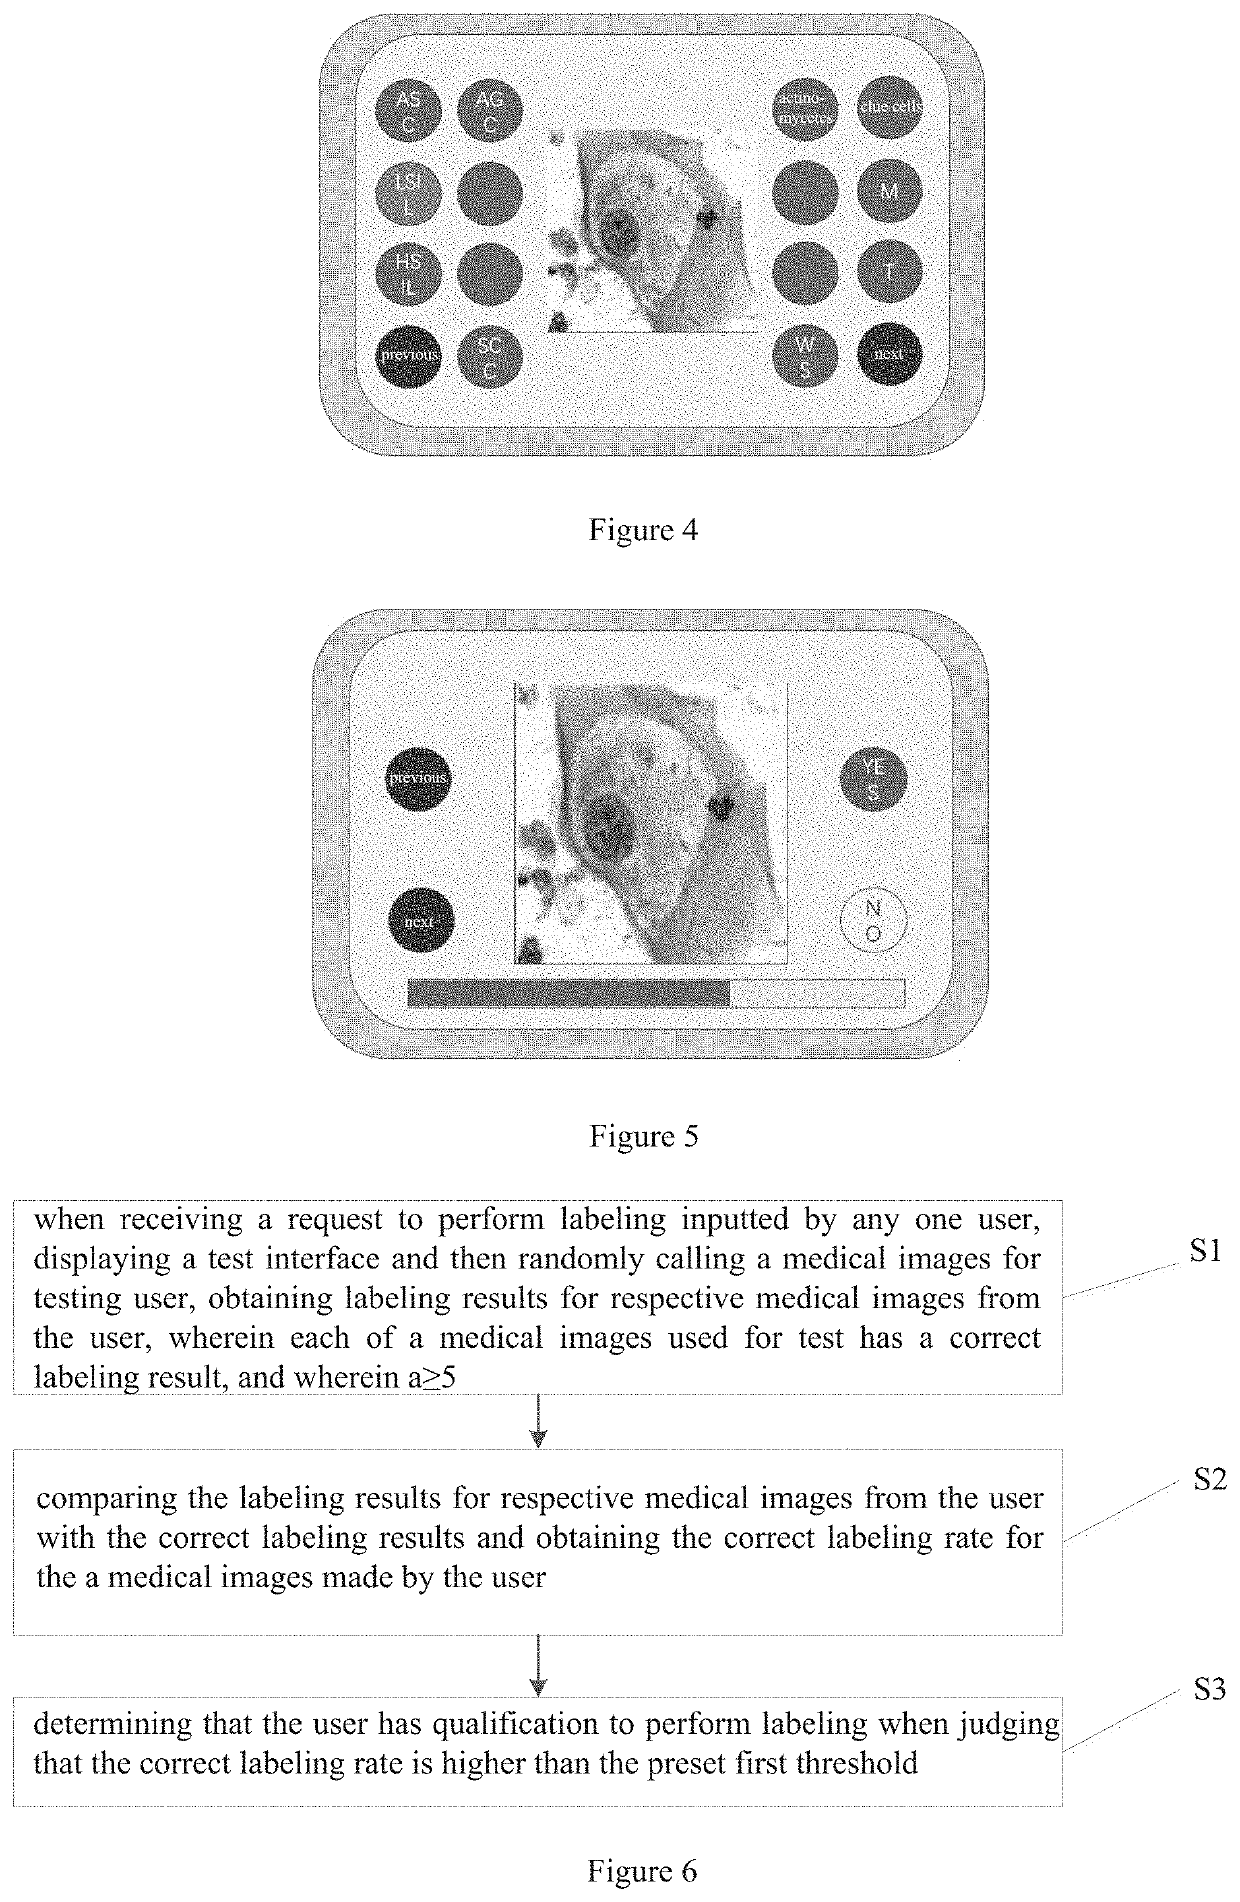 Methods and devices for pathologically labeling medical images, methods and devices for issuing reports based on medical images, and computer-readable storage media